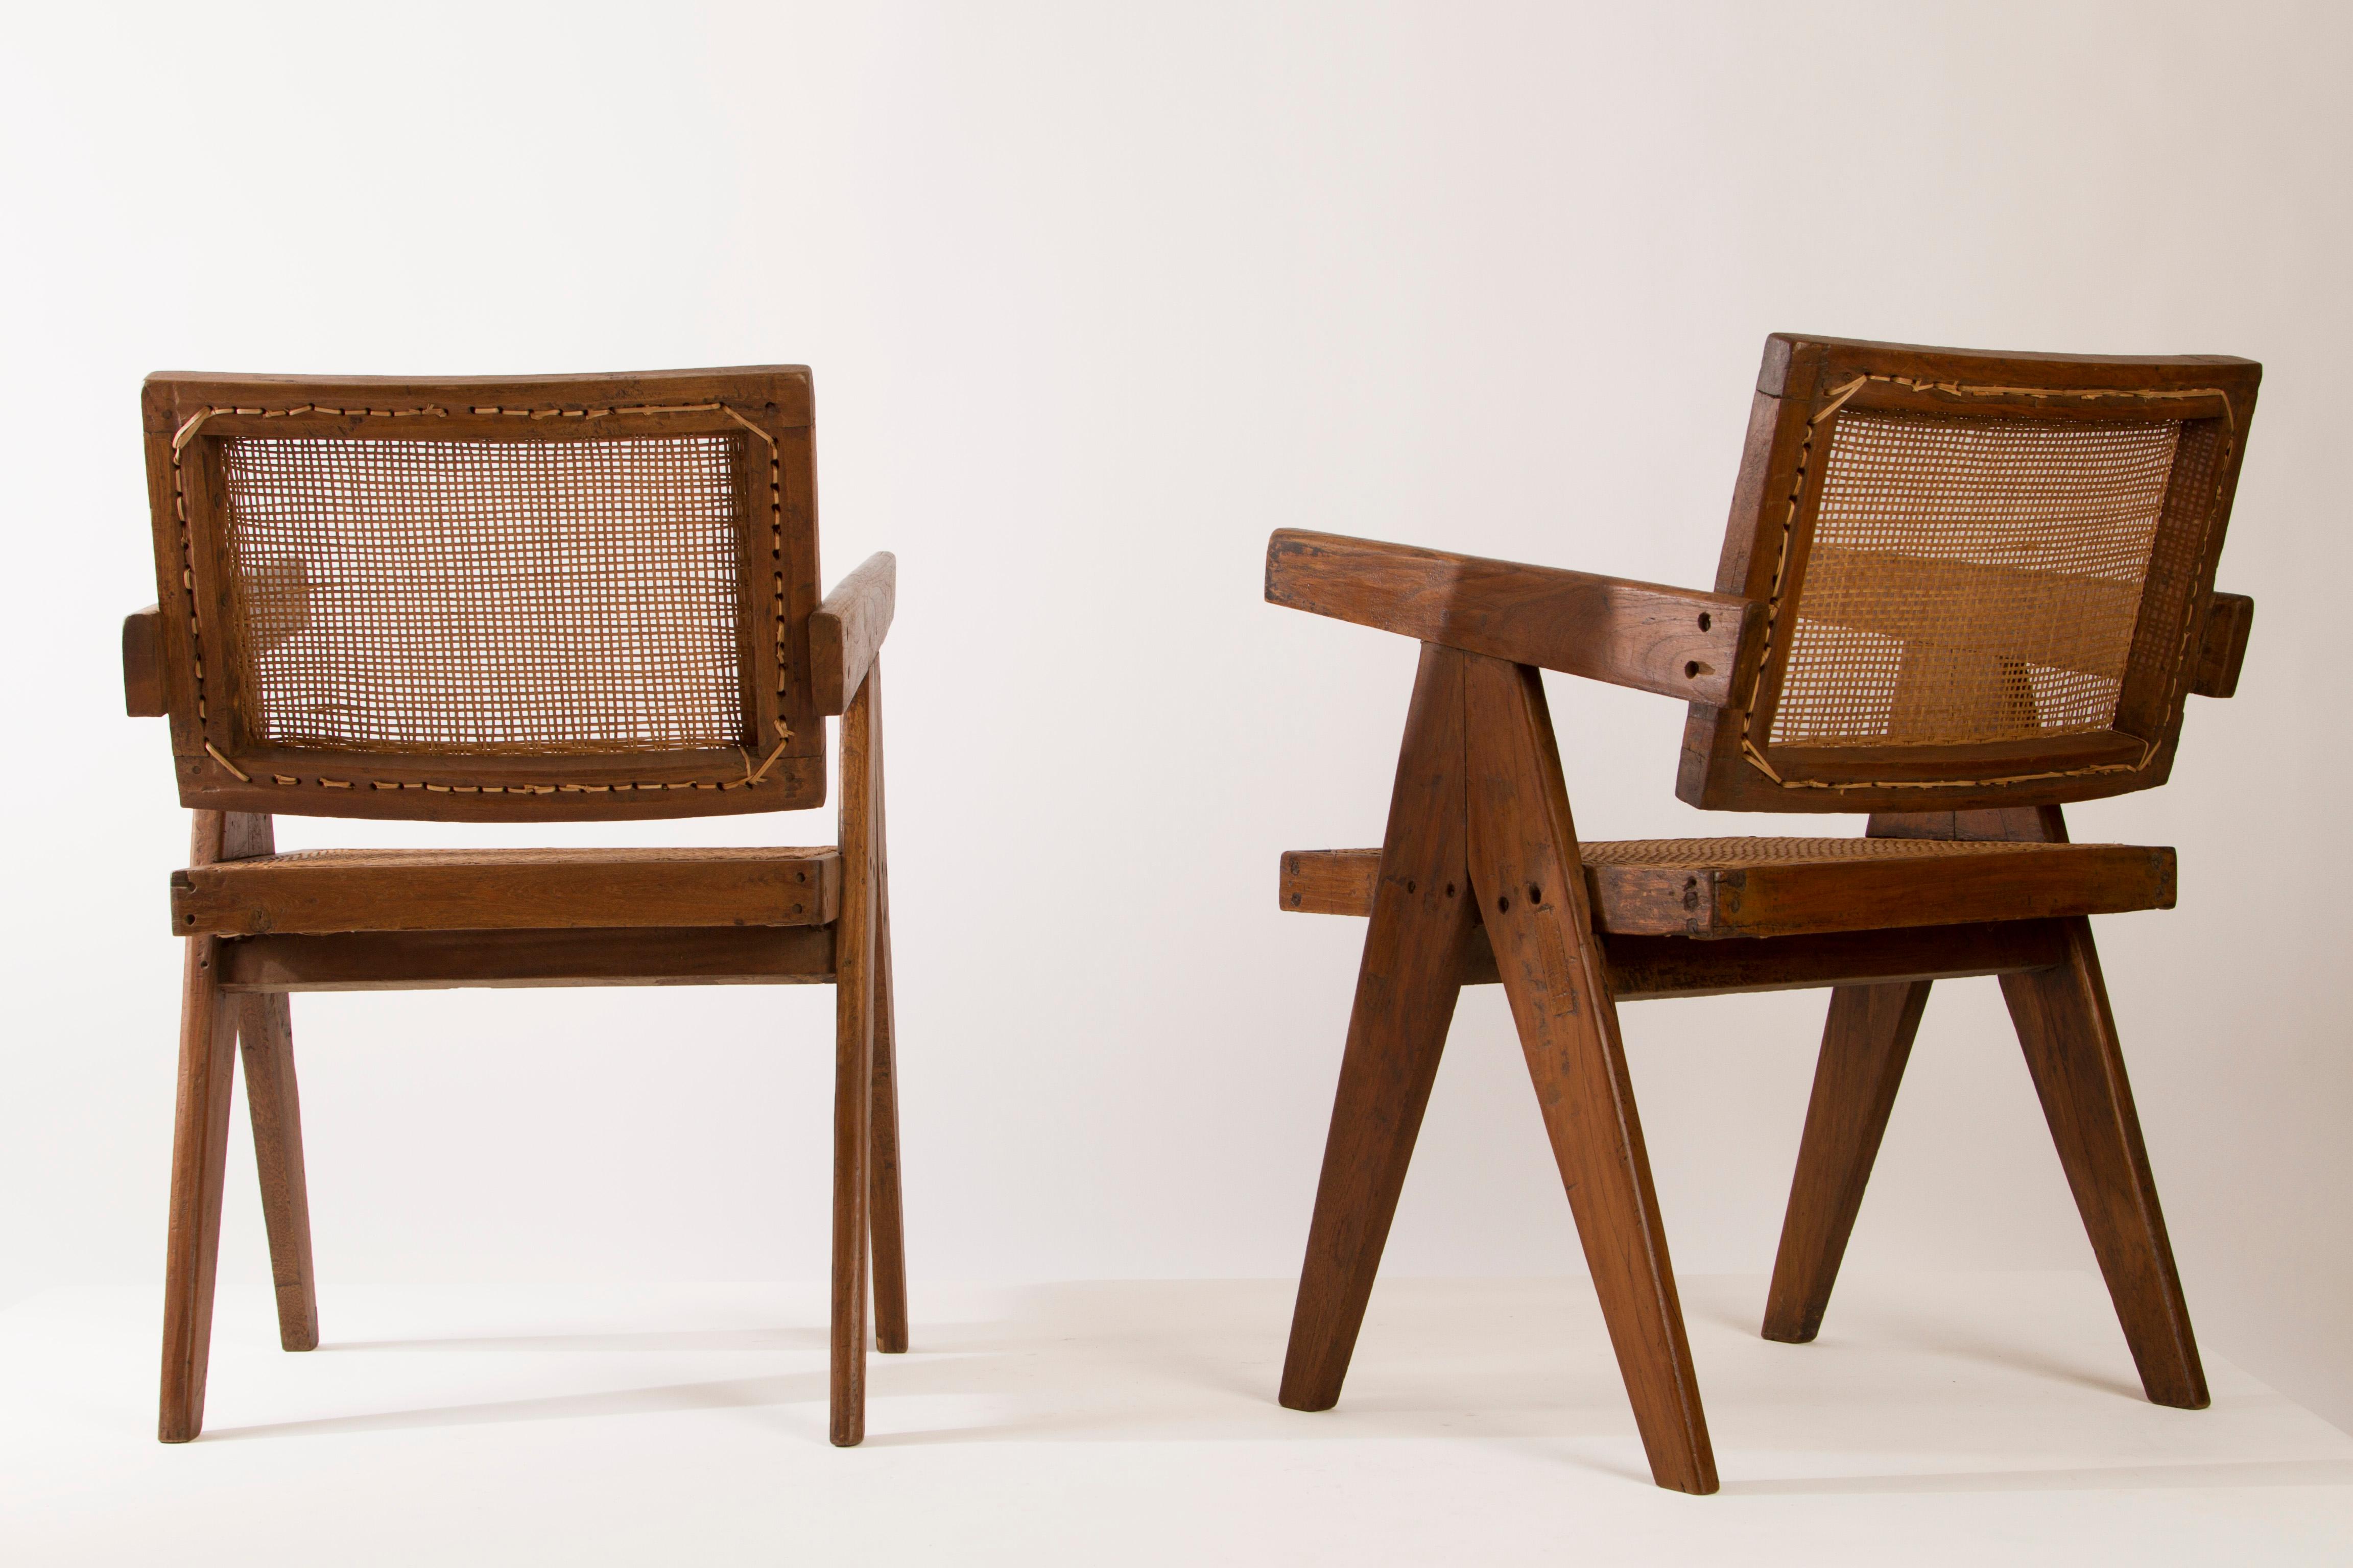 Pierre Jeanneret, pair of armchairs with floating back in East Indian Rosewood, seat and back is cane.
Provenance: Punjab University Administration Office and Architectural Offices, Chandigarh, India.